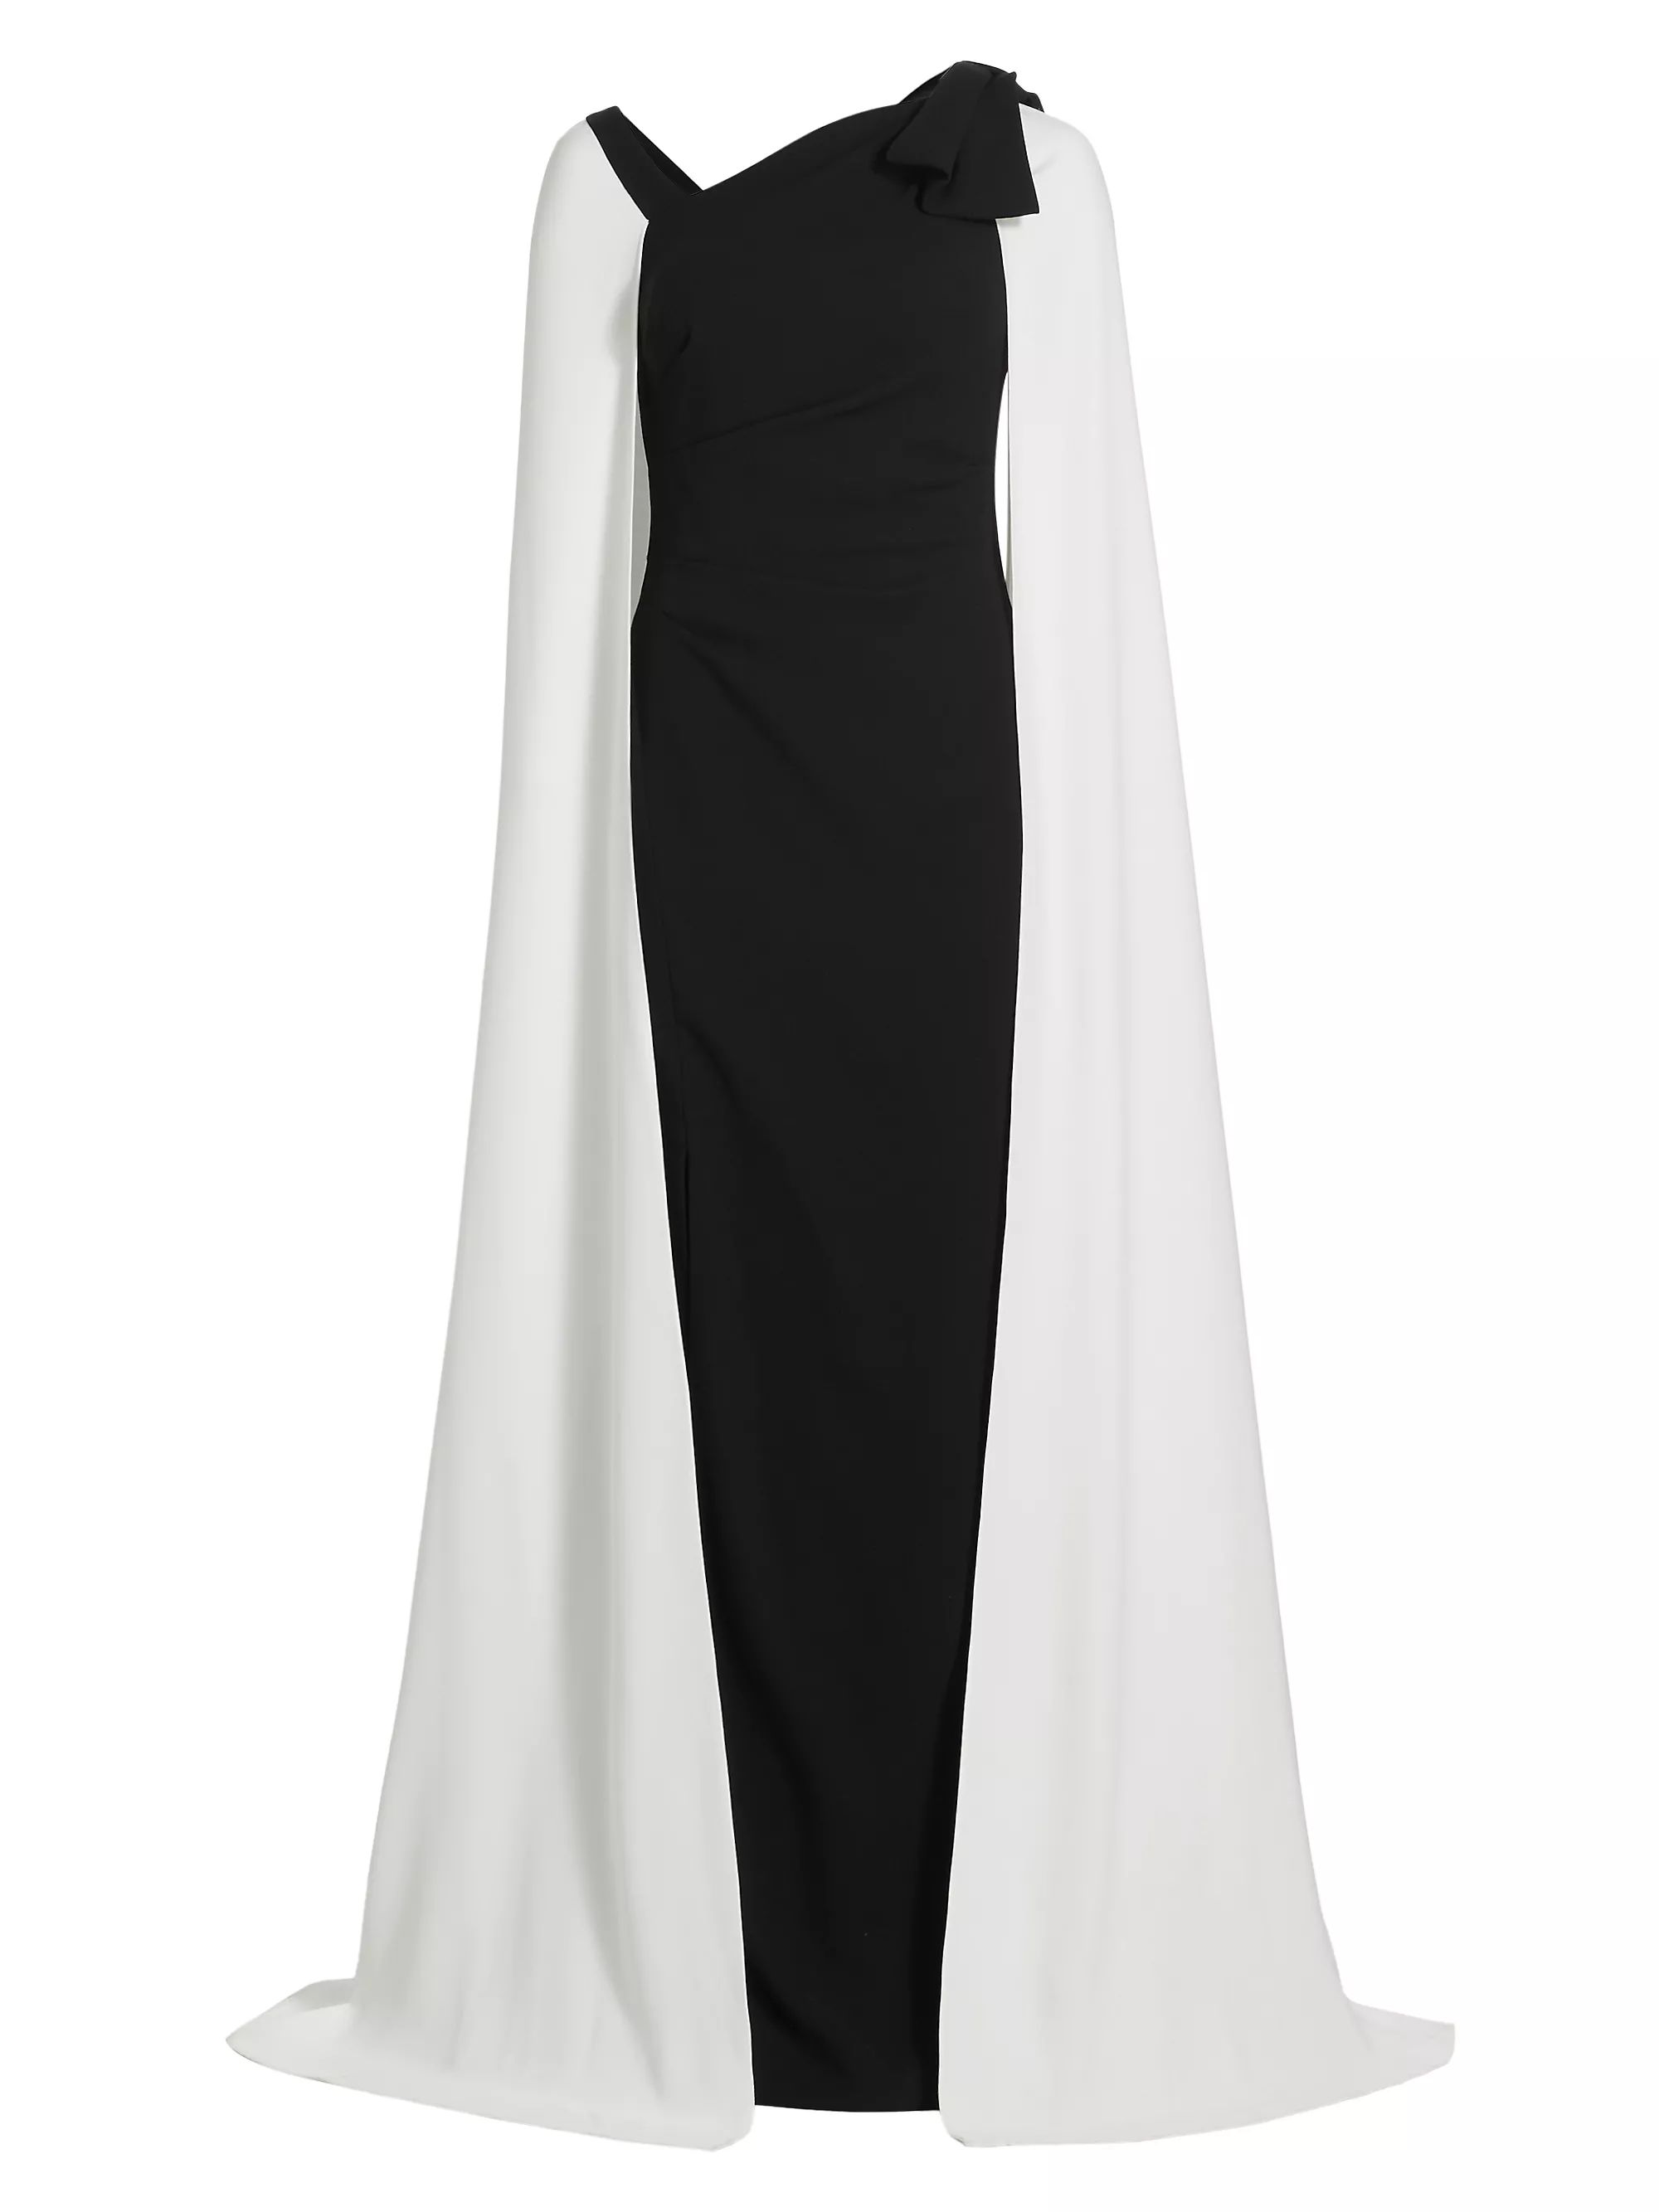 Black WhiteAll Evening GownsTeri Jon by Rickie FreemanTwo-Tone Chiffon Cape Gown$810SELECT SIZE ... | Saks Fifth Avenue